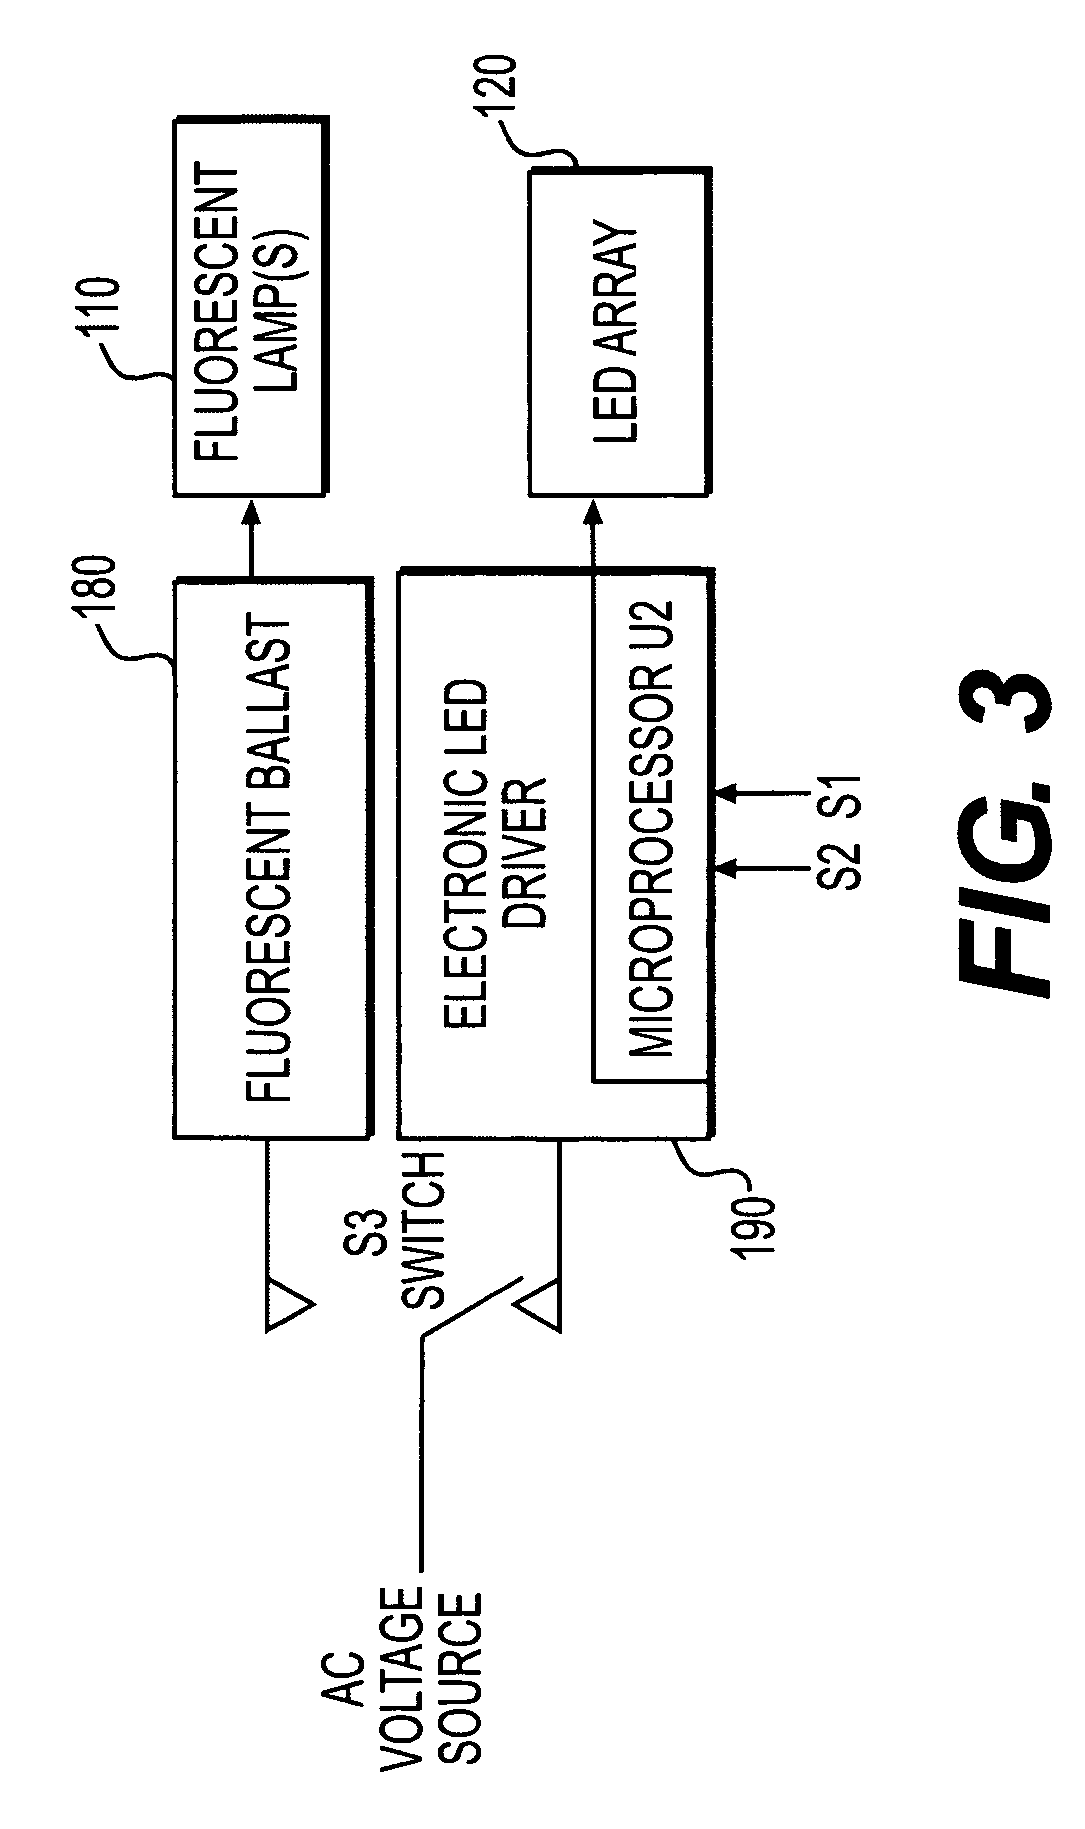 Lighting device having a circuit including a plurality of light emitting diodes, and methods of controlling and calibrating lighting devices